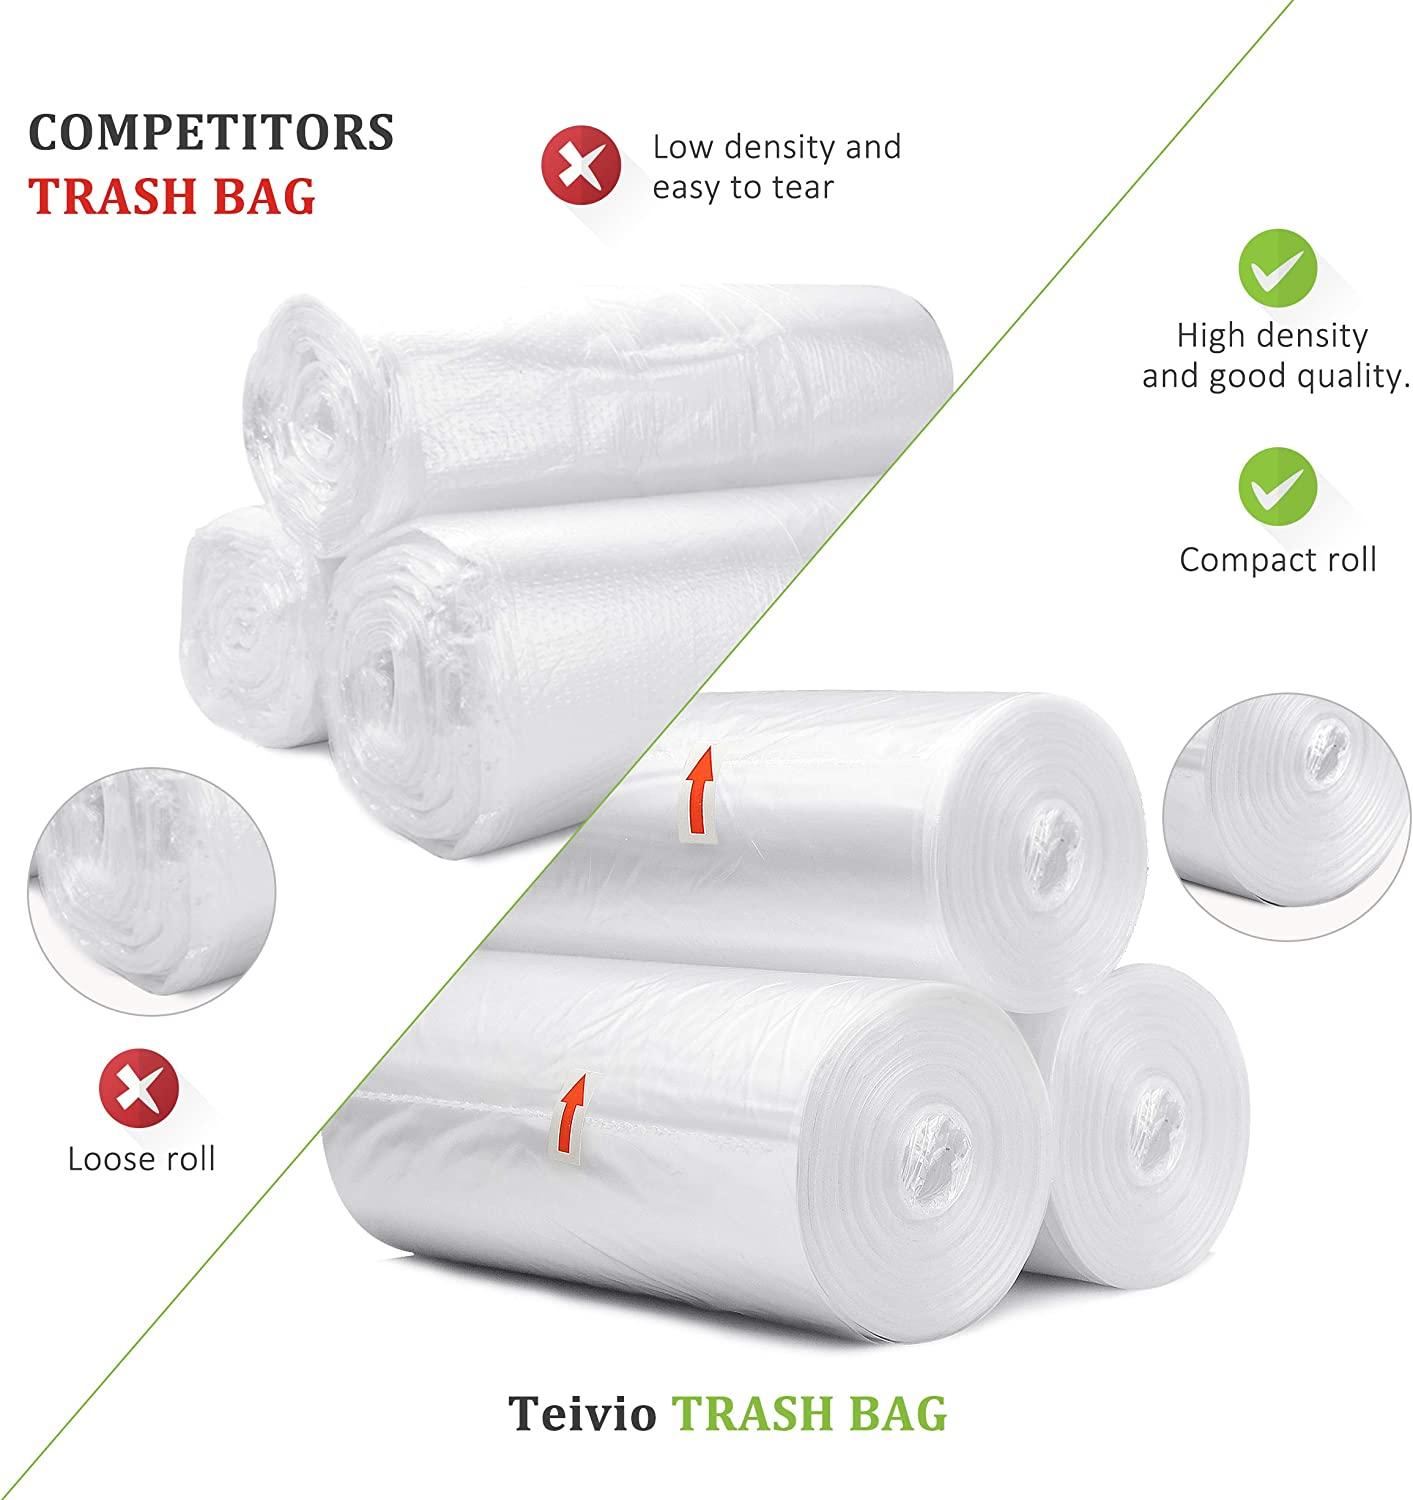 4 Gallon 330Pcs Strong Trash Bags Colorful Clear Garbage Bags, Bathroom  Trash Can Bin Liners, Small Plastic Bags For Home Office Kitchen, Fit 12-15  Liter, 3,3.5,4.5 Gal,Multicolor 